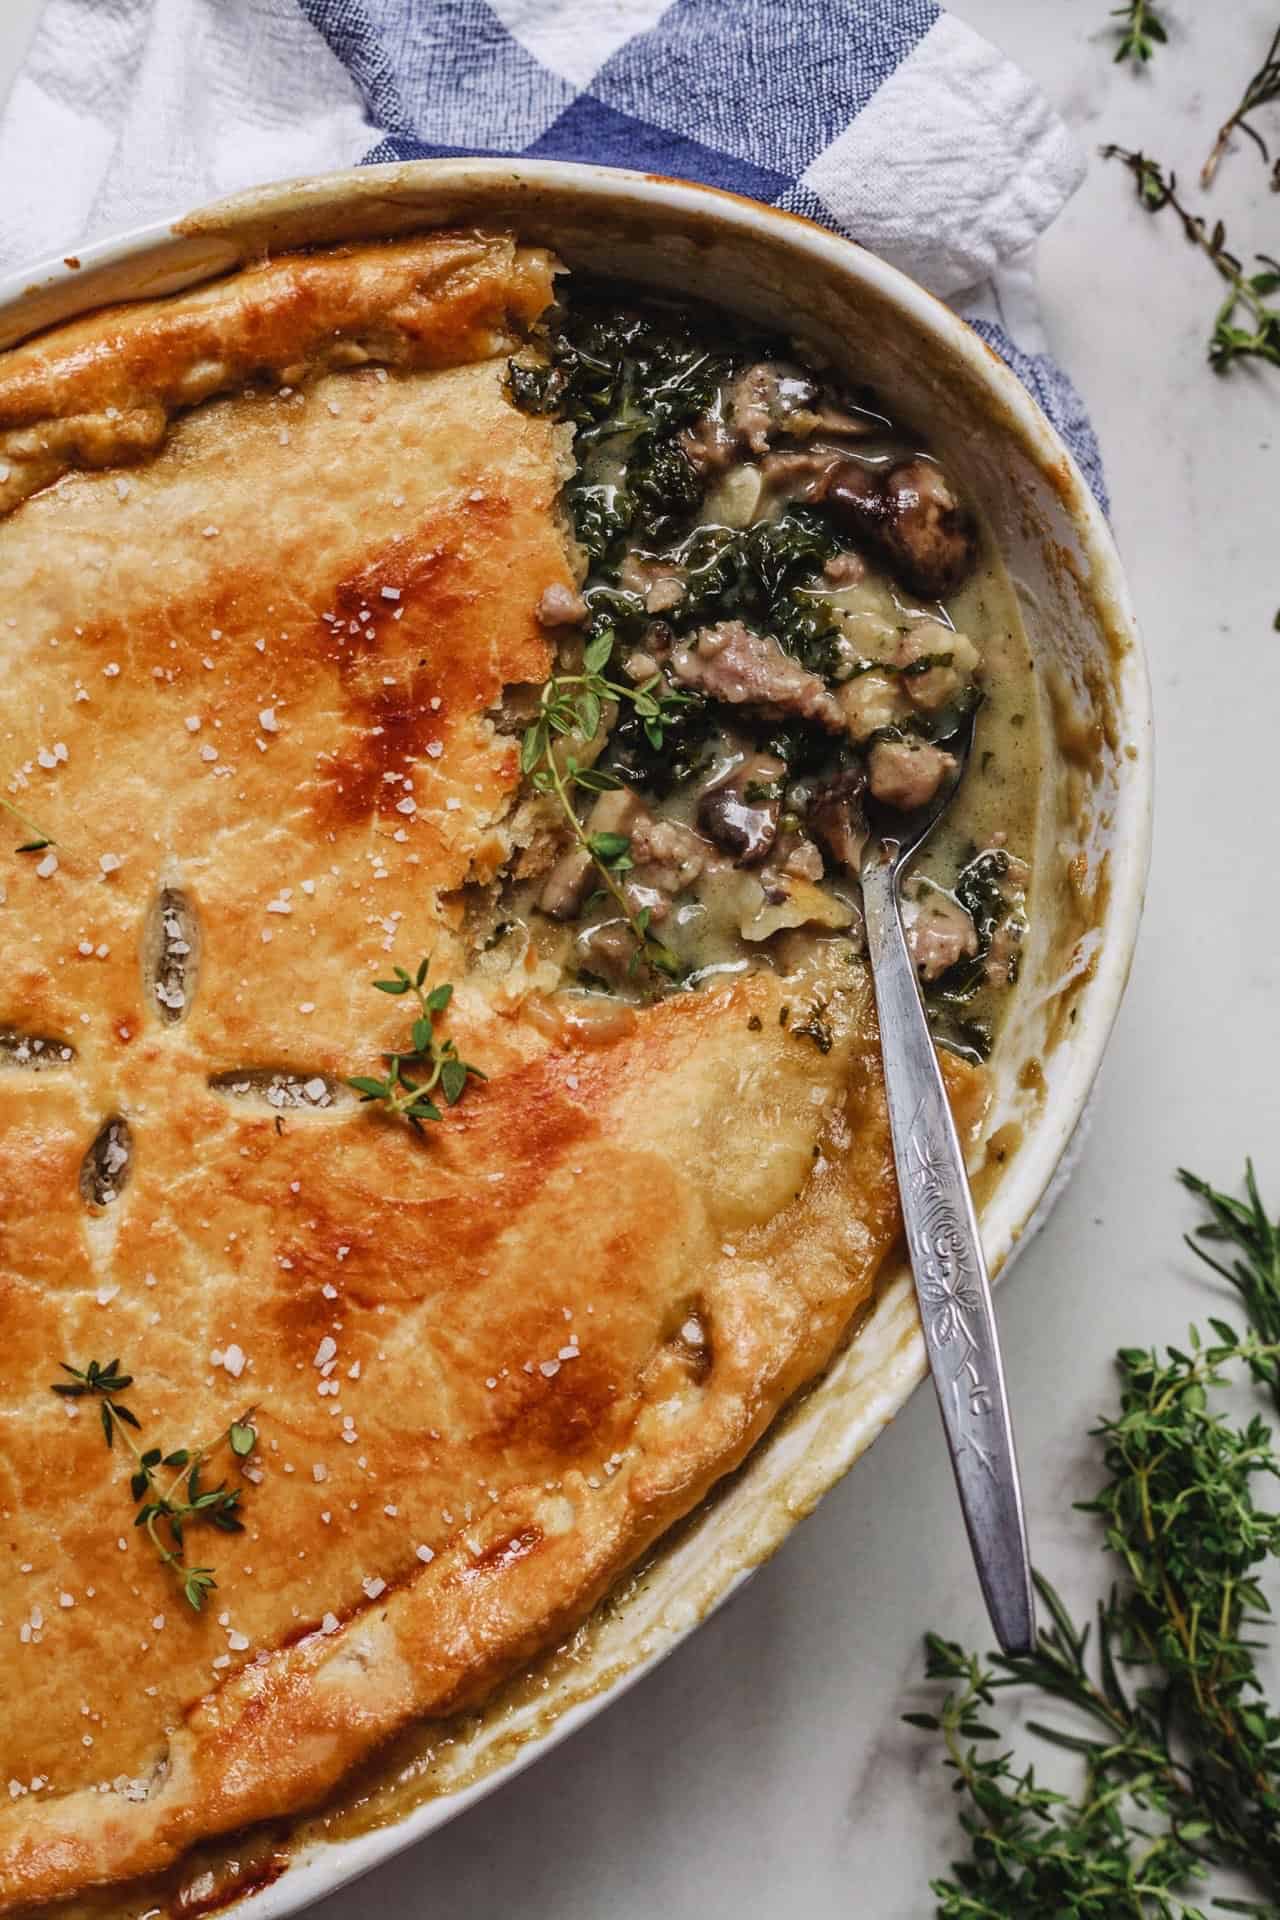 A savory mushroom and spinach pie garnished with a spoon.